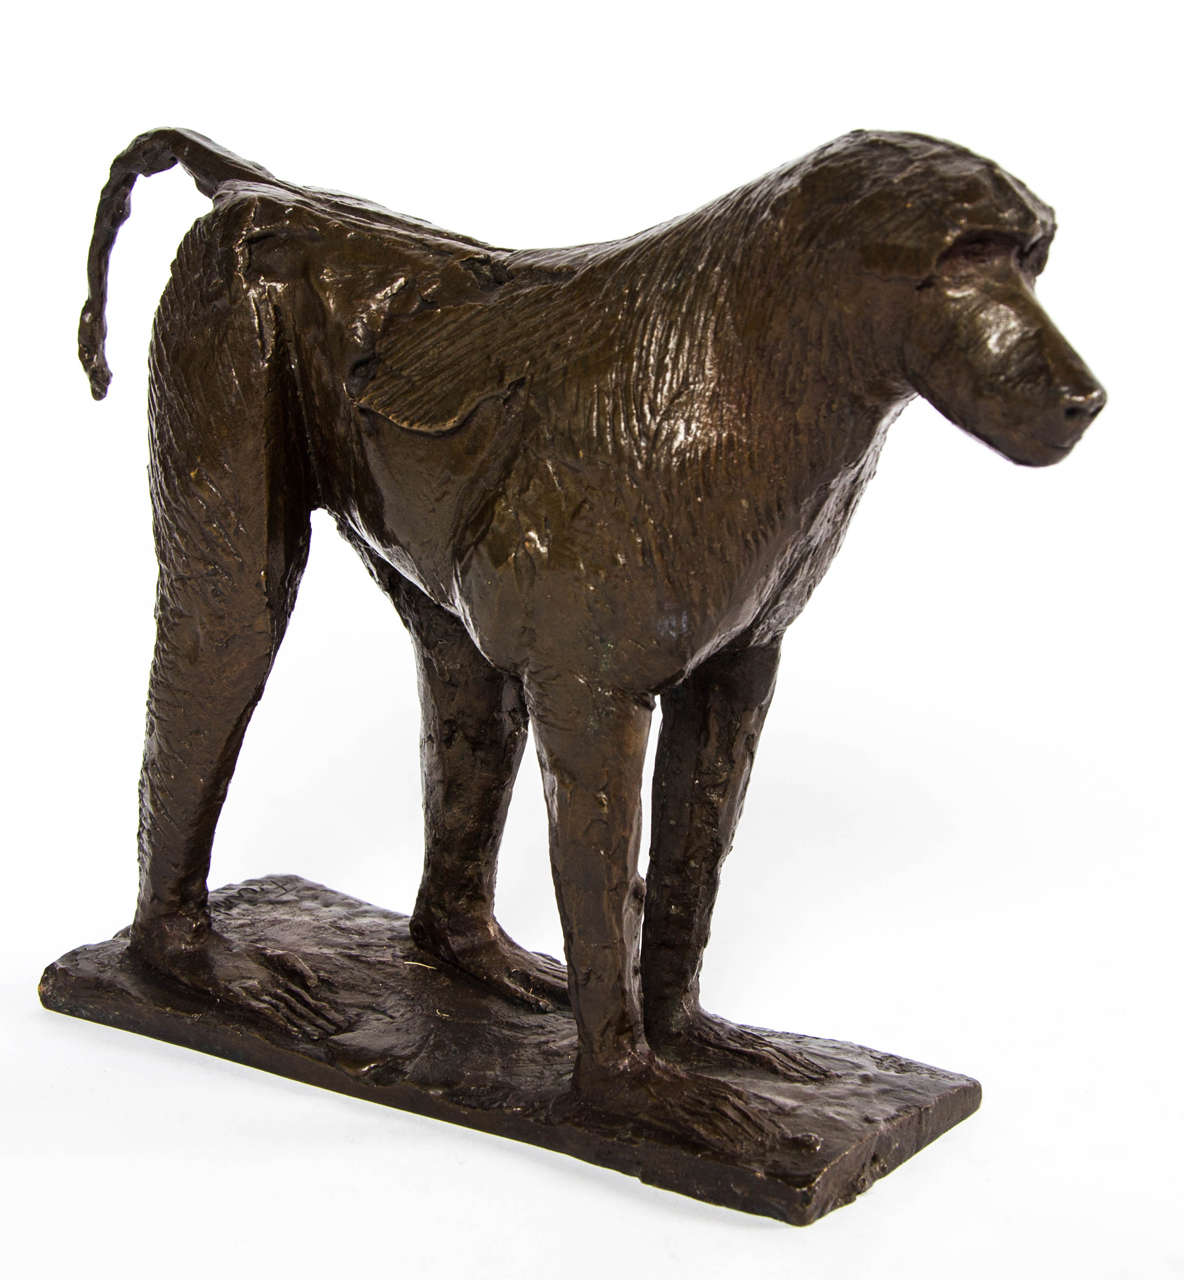 Baboon by Dame Elisabeth Frink, R.A. (1930-1993).
A bronze study of a baboon set on an integral base with a dark brown patina
signed and numbered 'Frink 8/9' to the base.

Conceived in 1976.

Literature: B. Robertson (ed) Elisabeth Frink,